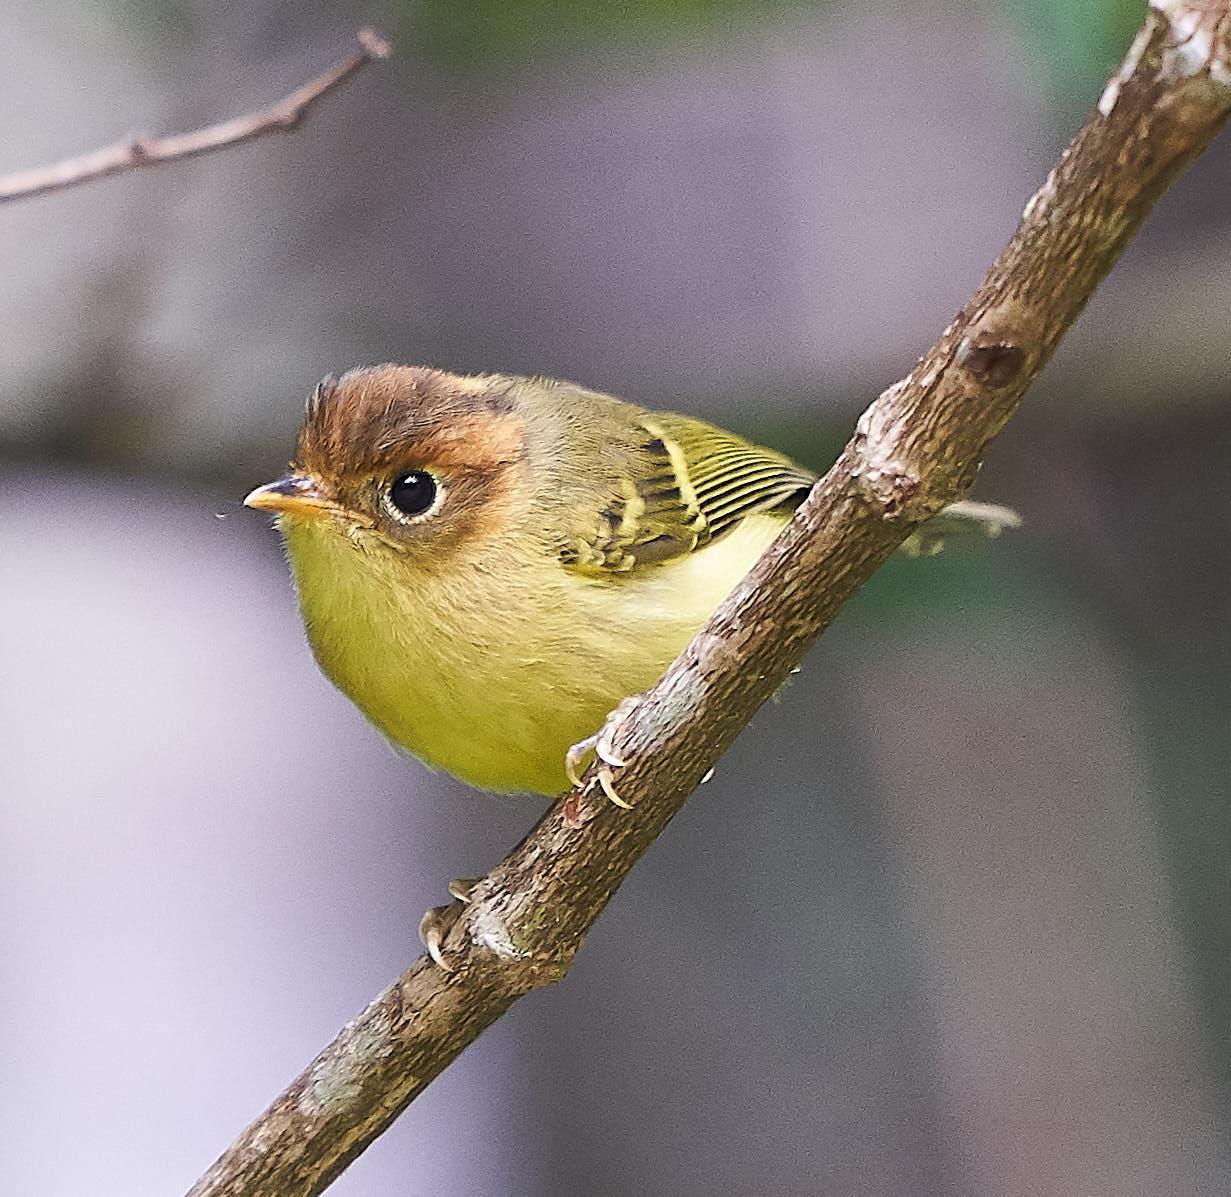 Yellow-breasted Warbler Photo by Steven Cheong